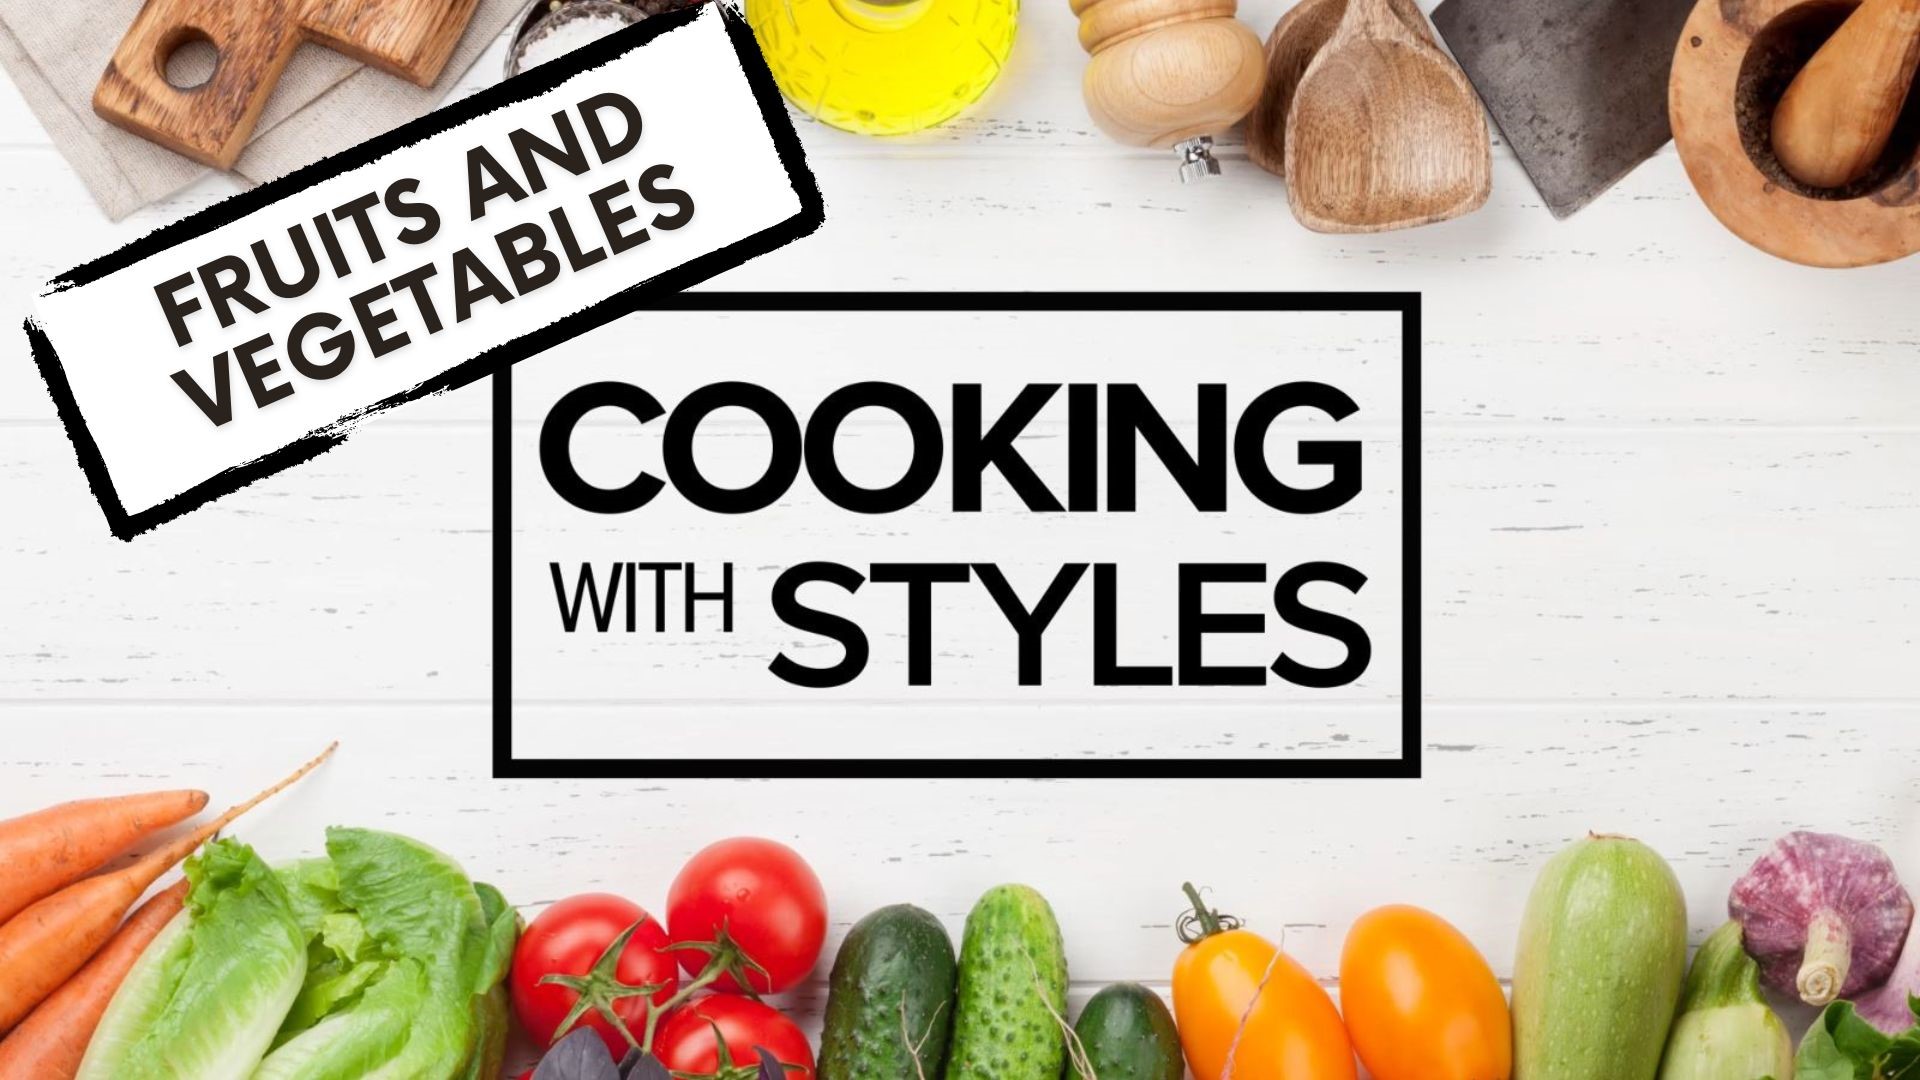 In this edition of Cooking with Styles, we learn how to prepare different fruits and vegetables.